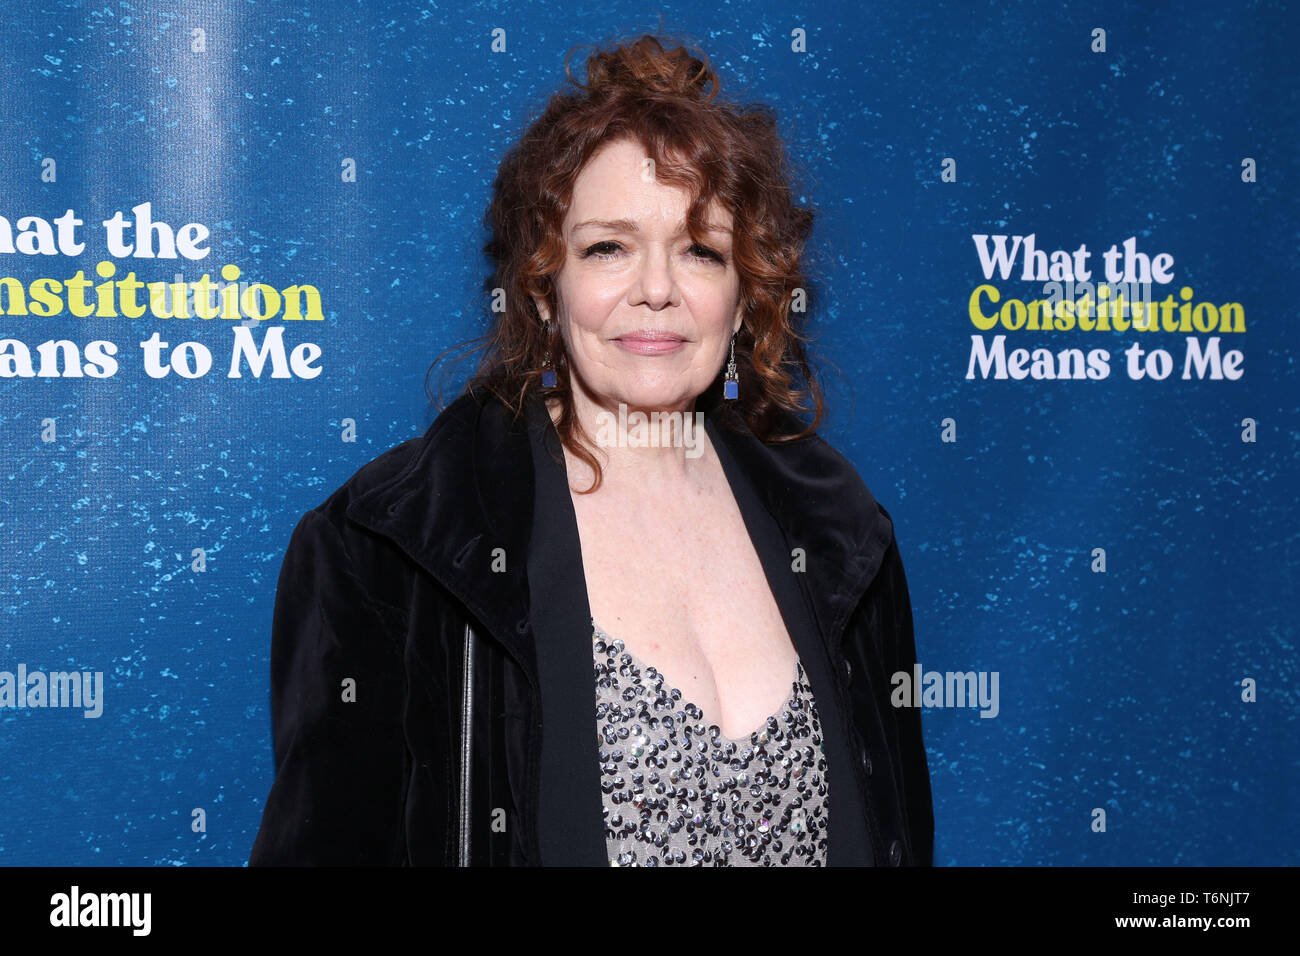 Opening night for What The Constitution Means To Me at the Helen Hayes Theatre - Arrivals.  Featuring: Deidre O'Connell Where: New York, New York, United States When: 31 Mar 2019 Credit: Joseph Marzullo/WENN.com Stock Photo